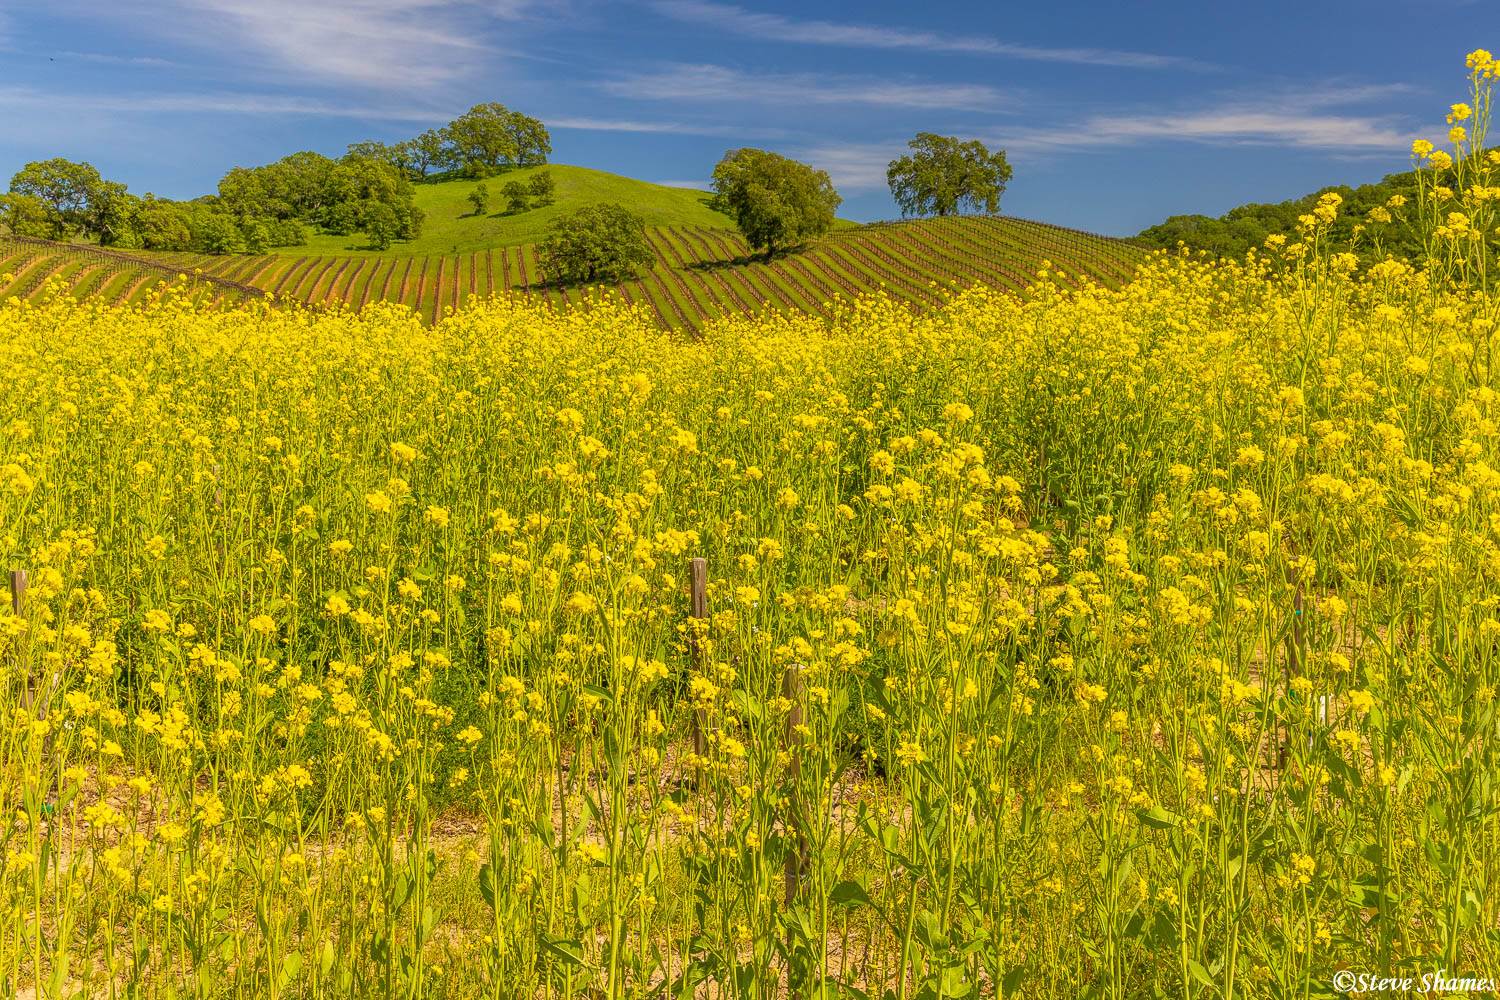 Wild mustard vineyard scene along Wooden Valley Road, which is just over the eastern hills from the Napa Valley.